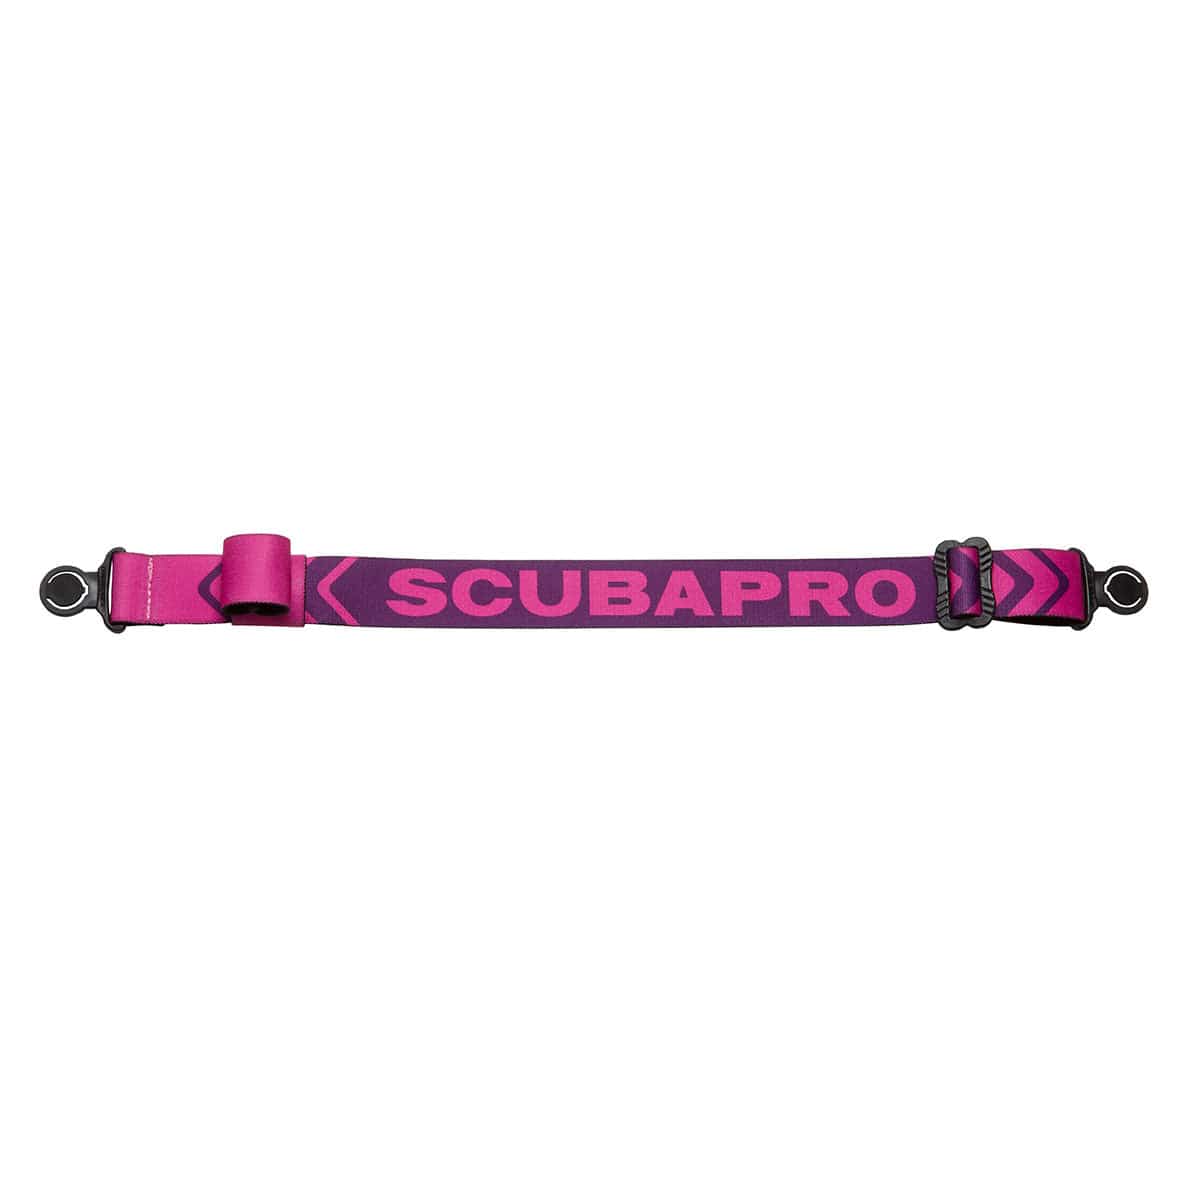 Scubapro Comfort Strap - Turquoise - 24.730.020-NED - 19